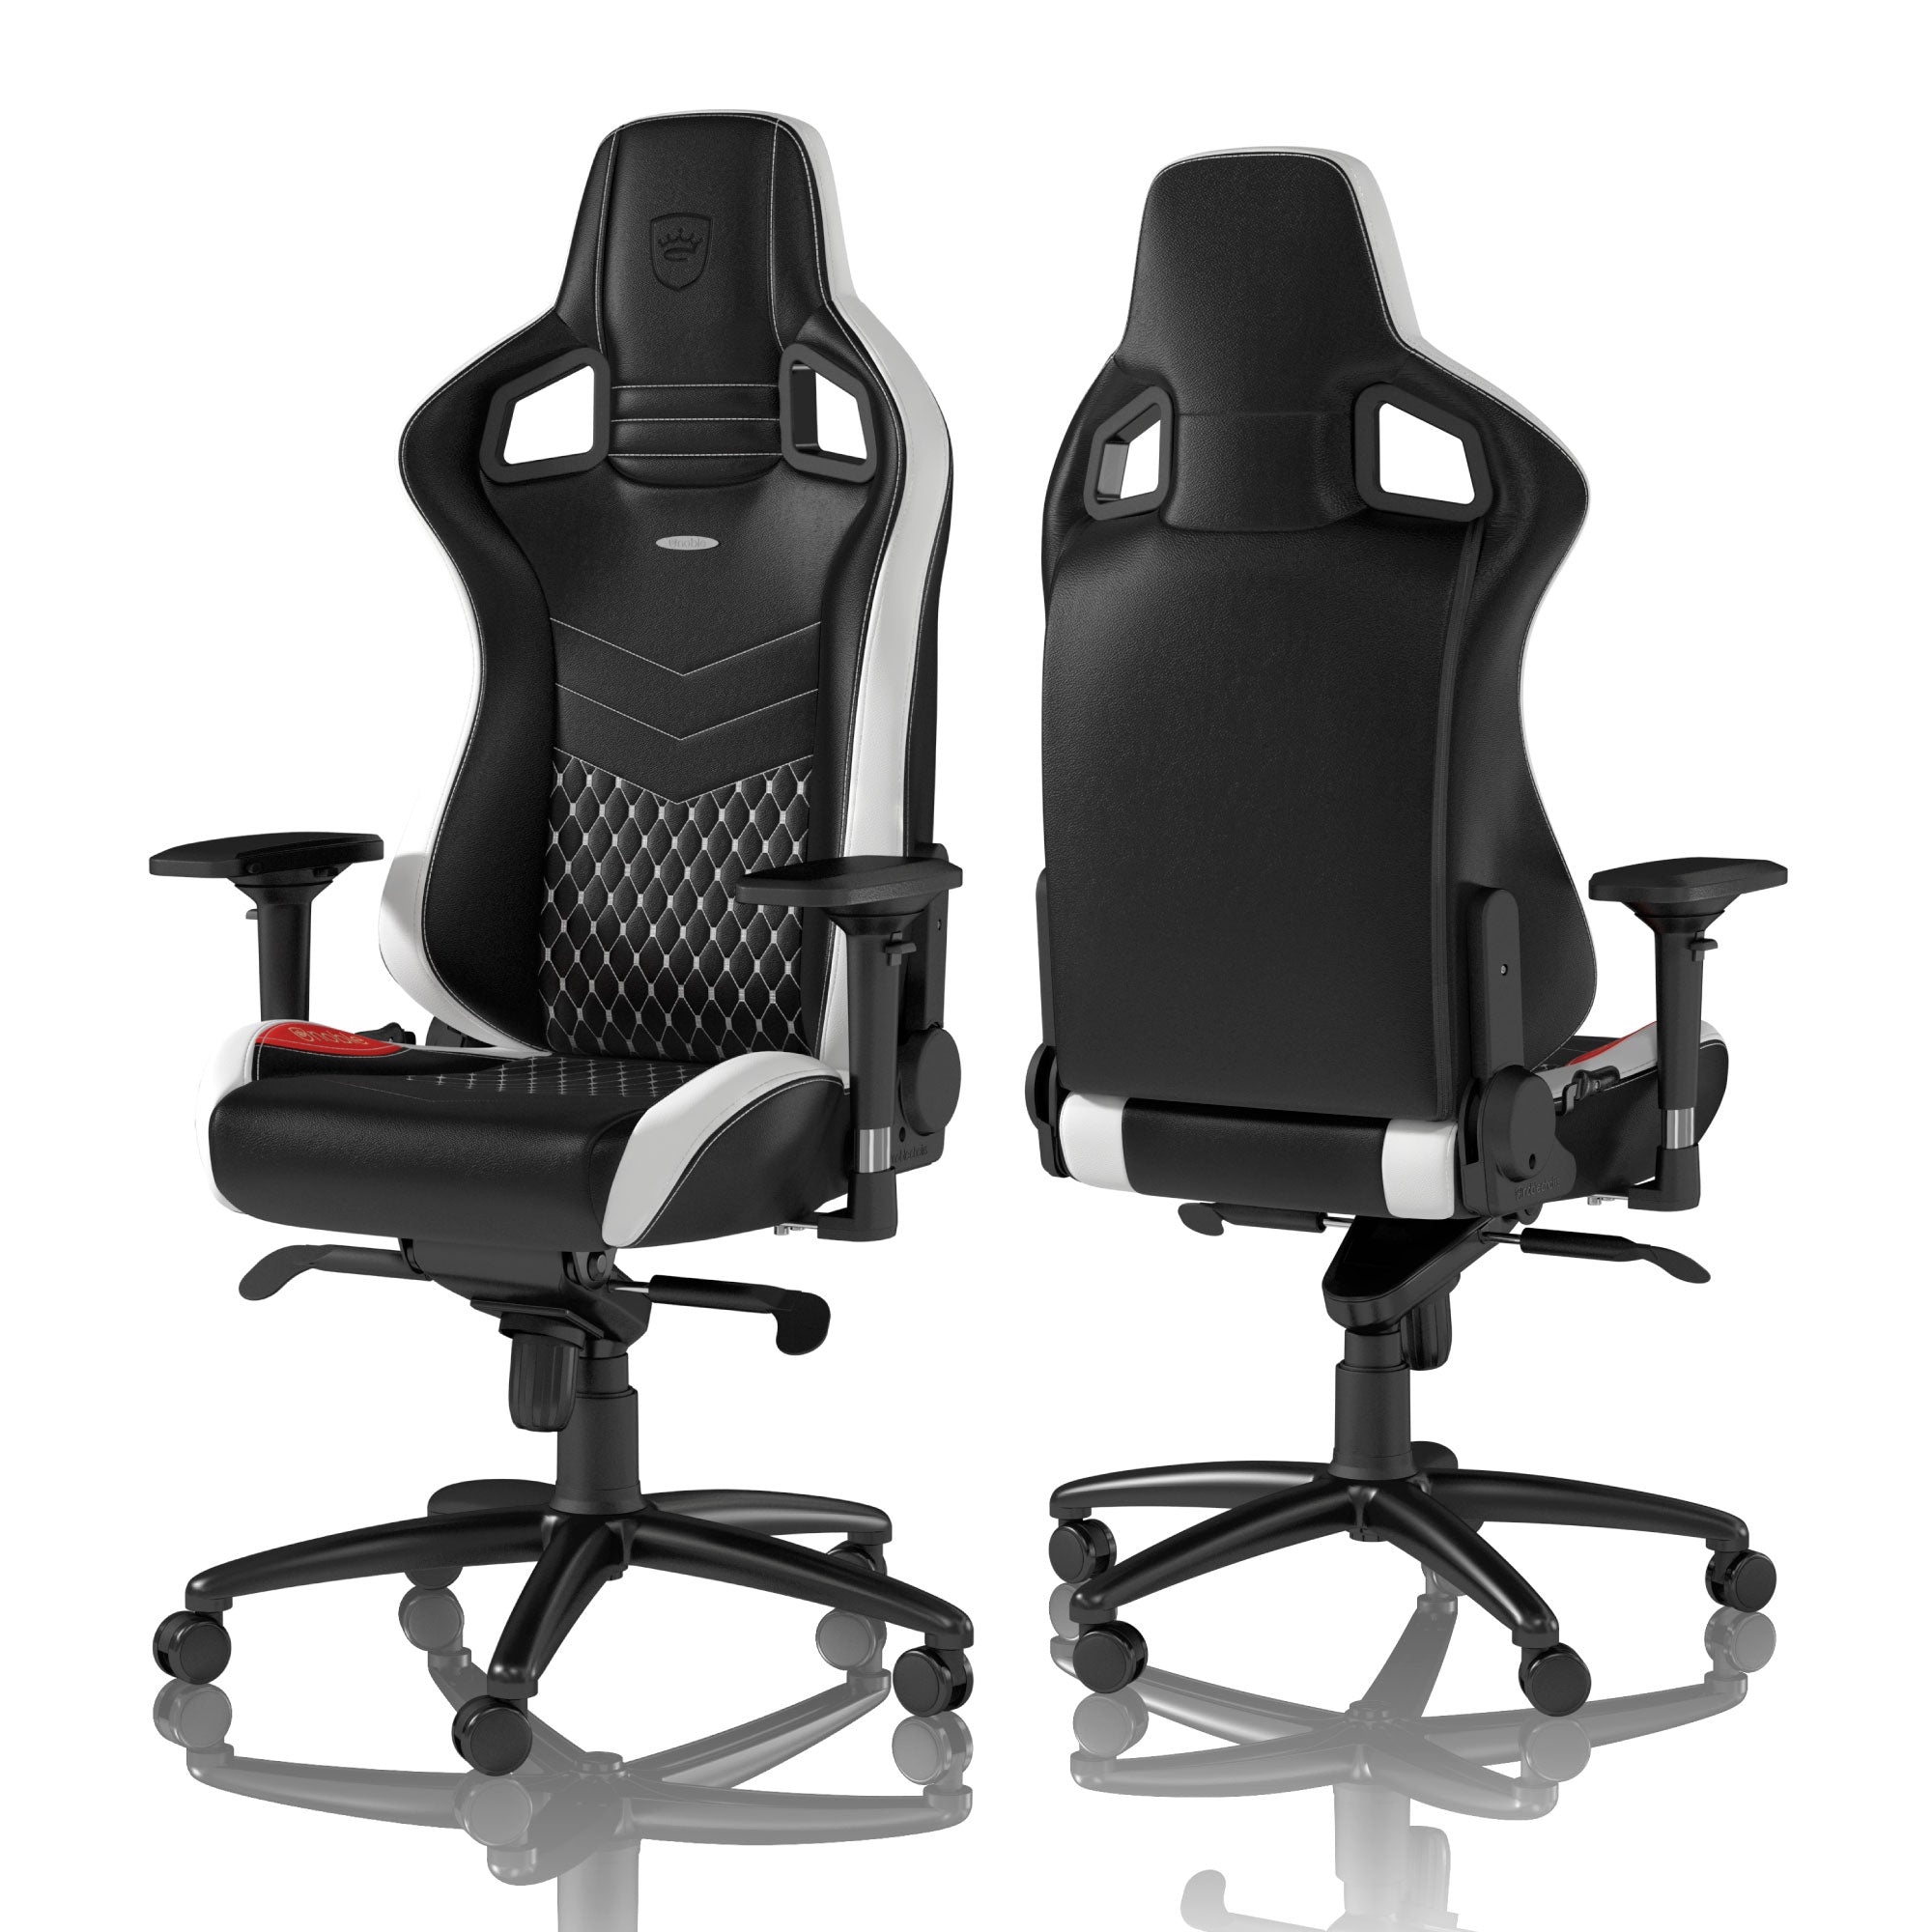 noblechairs ゲーミングチェア｜EPIC - Real Leather｜NBL-RL-EPC-002 